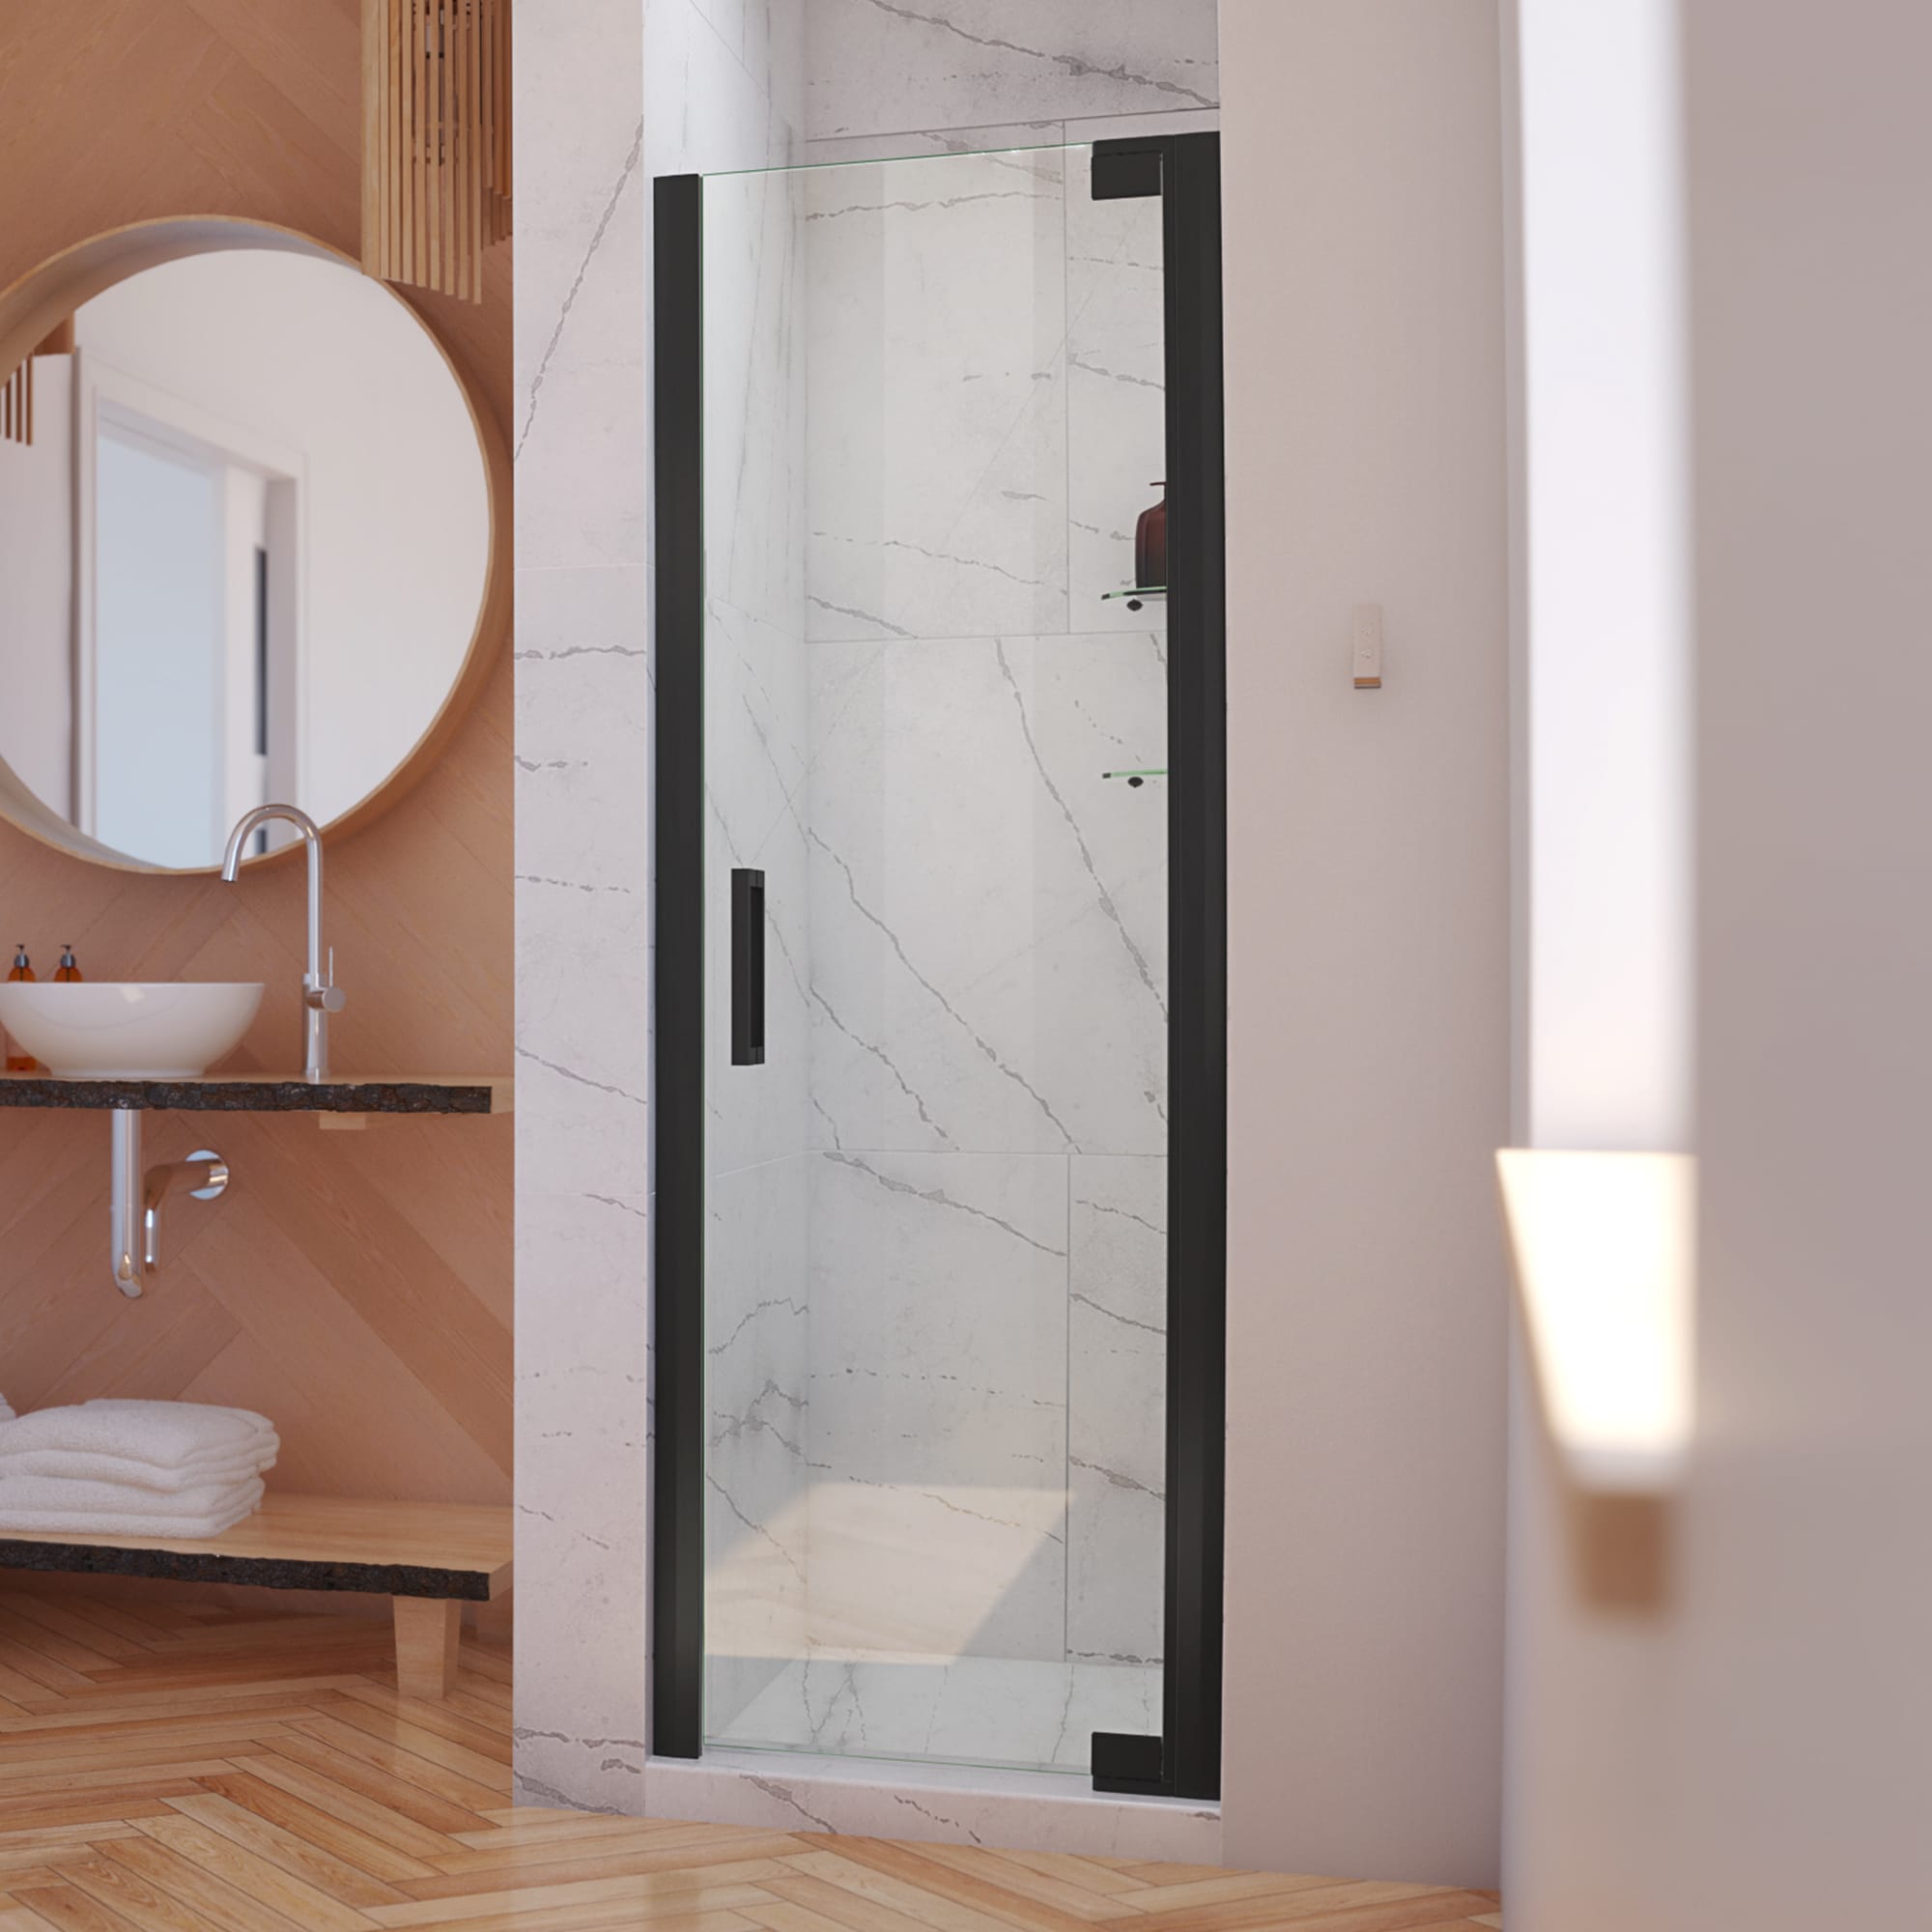 Polished Brass Finish Shower Door: Enhance Your Bathroom with Luxurious Elegance